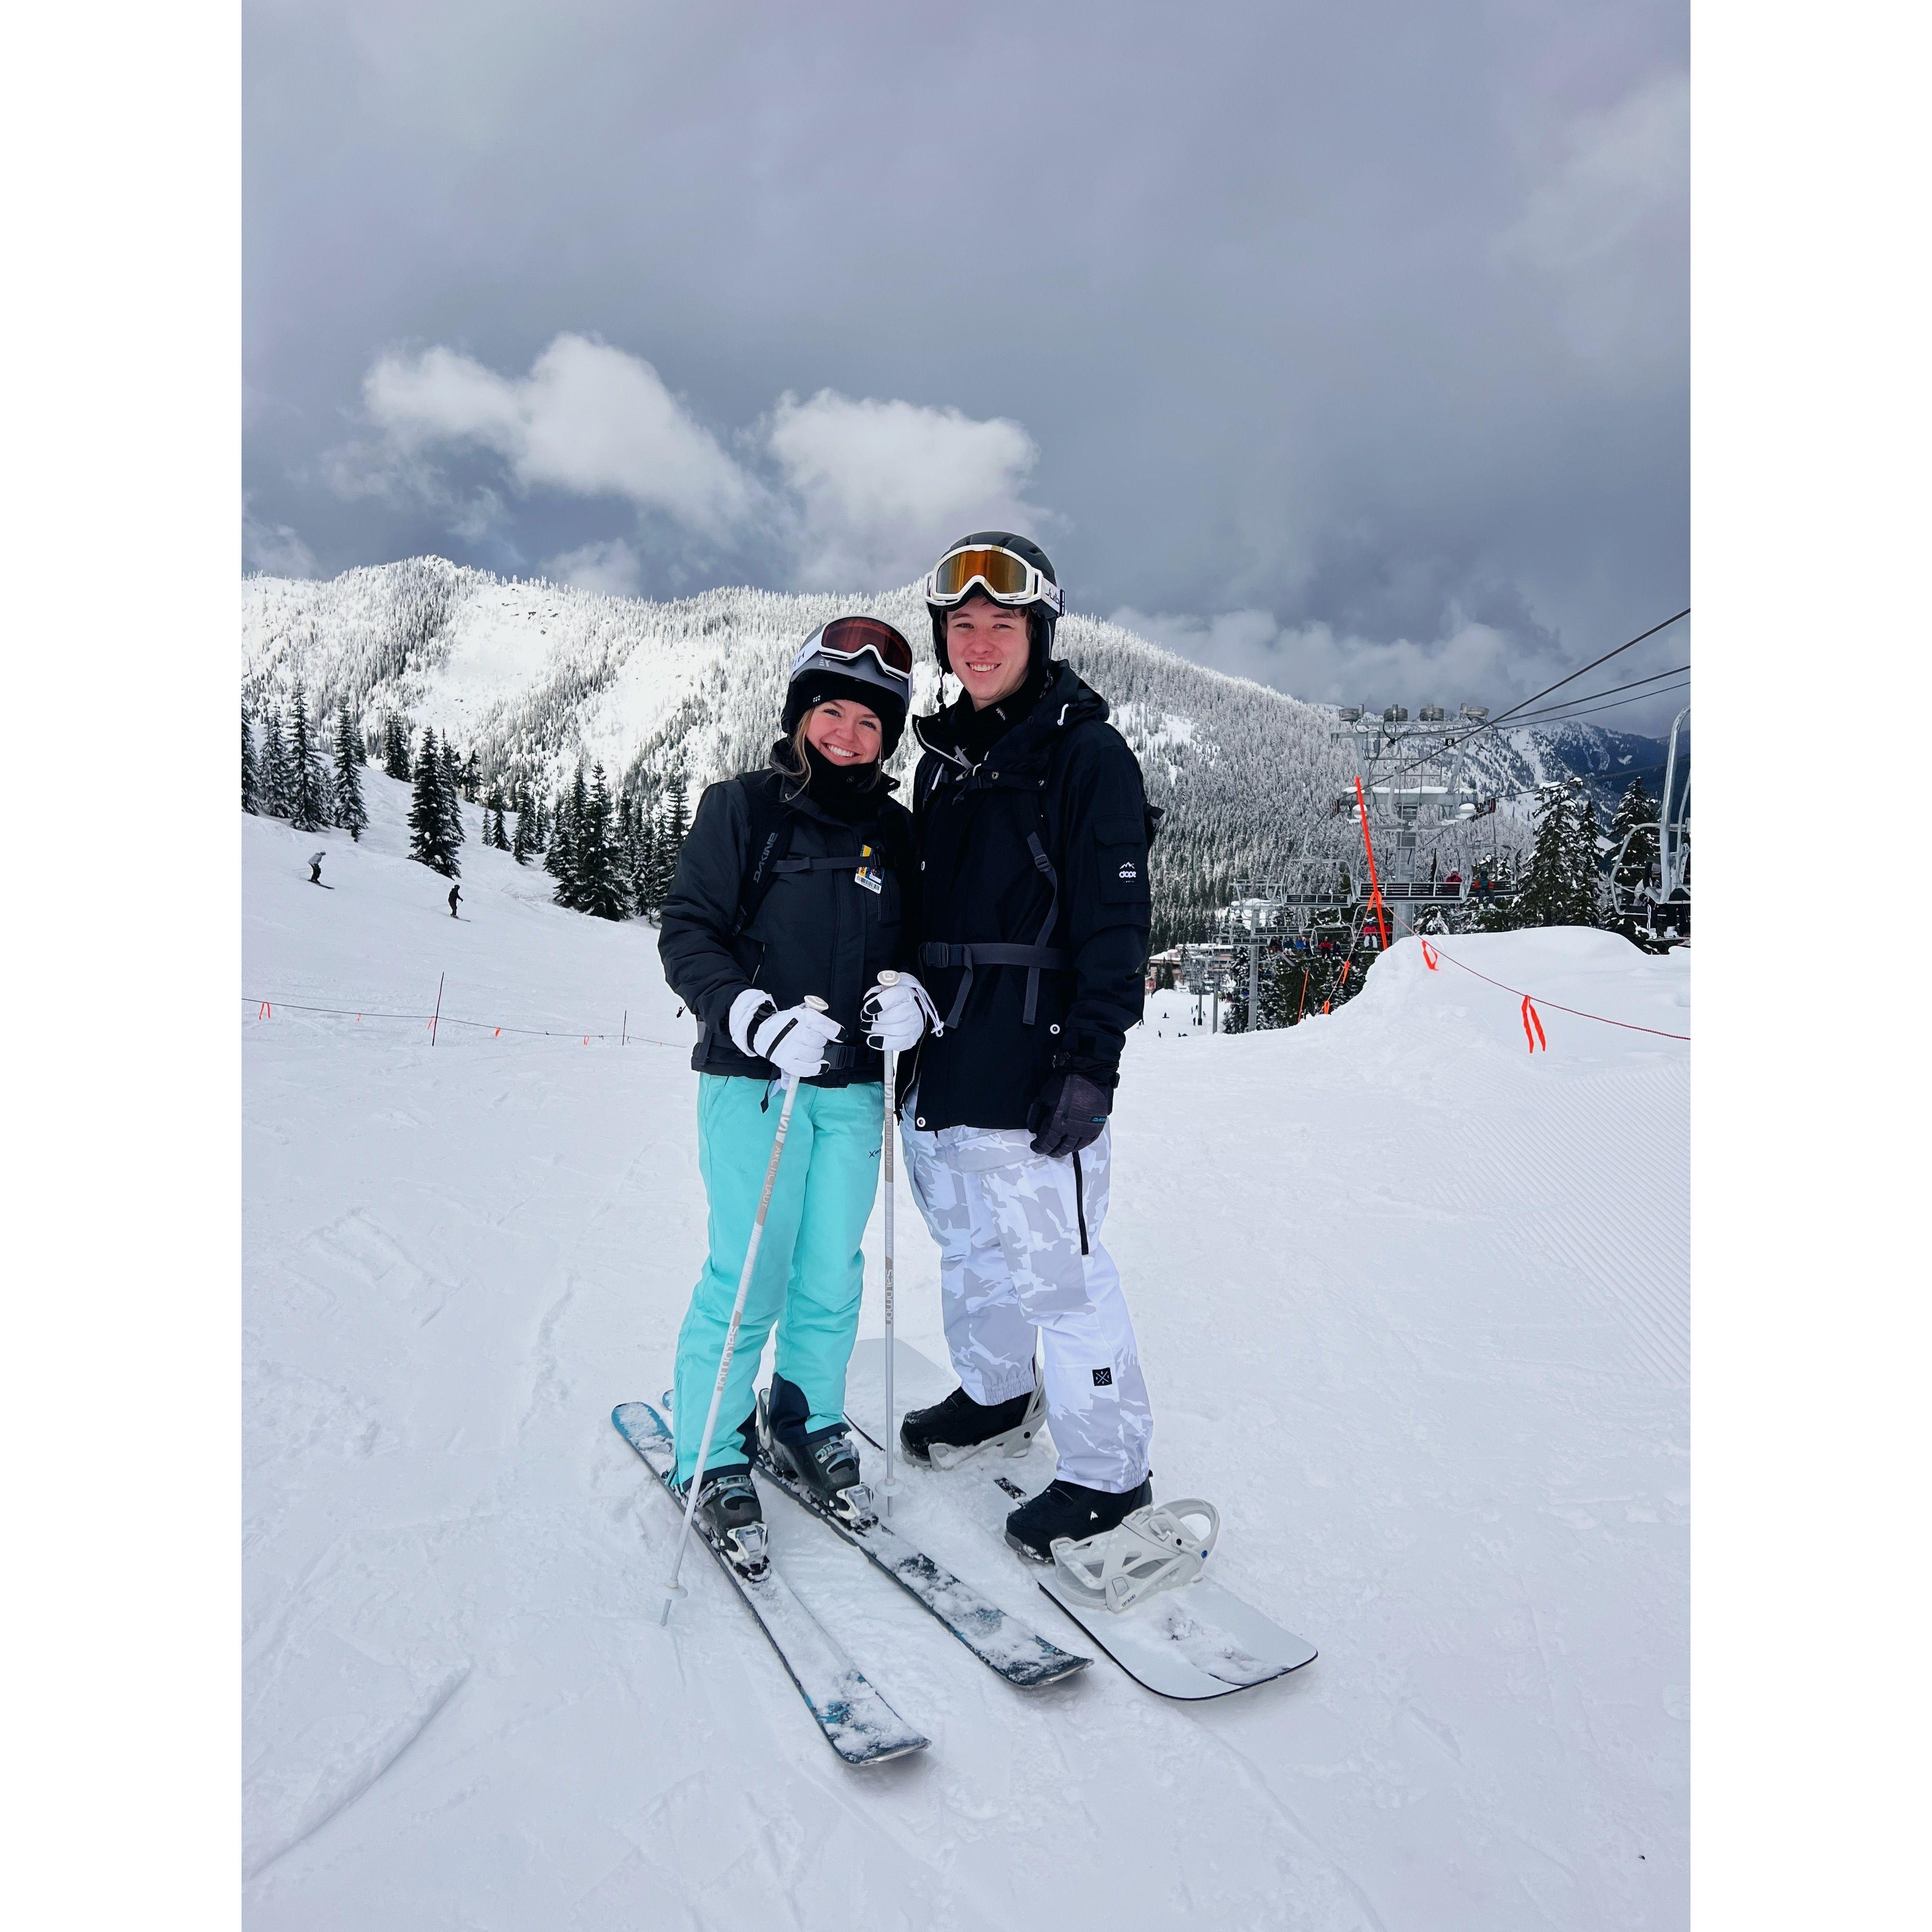 Being on the mountain together is our favorite place to be.